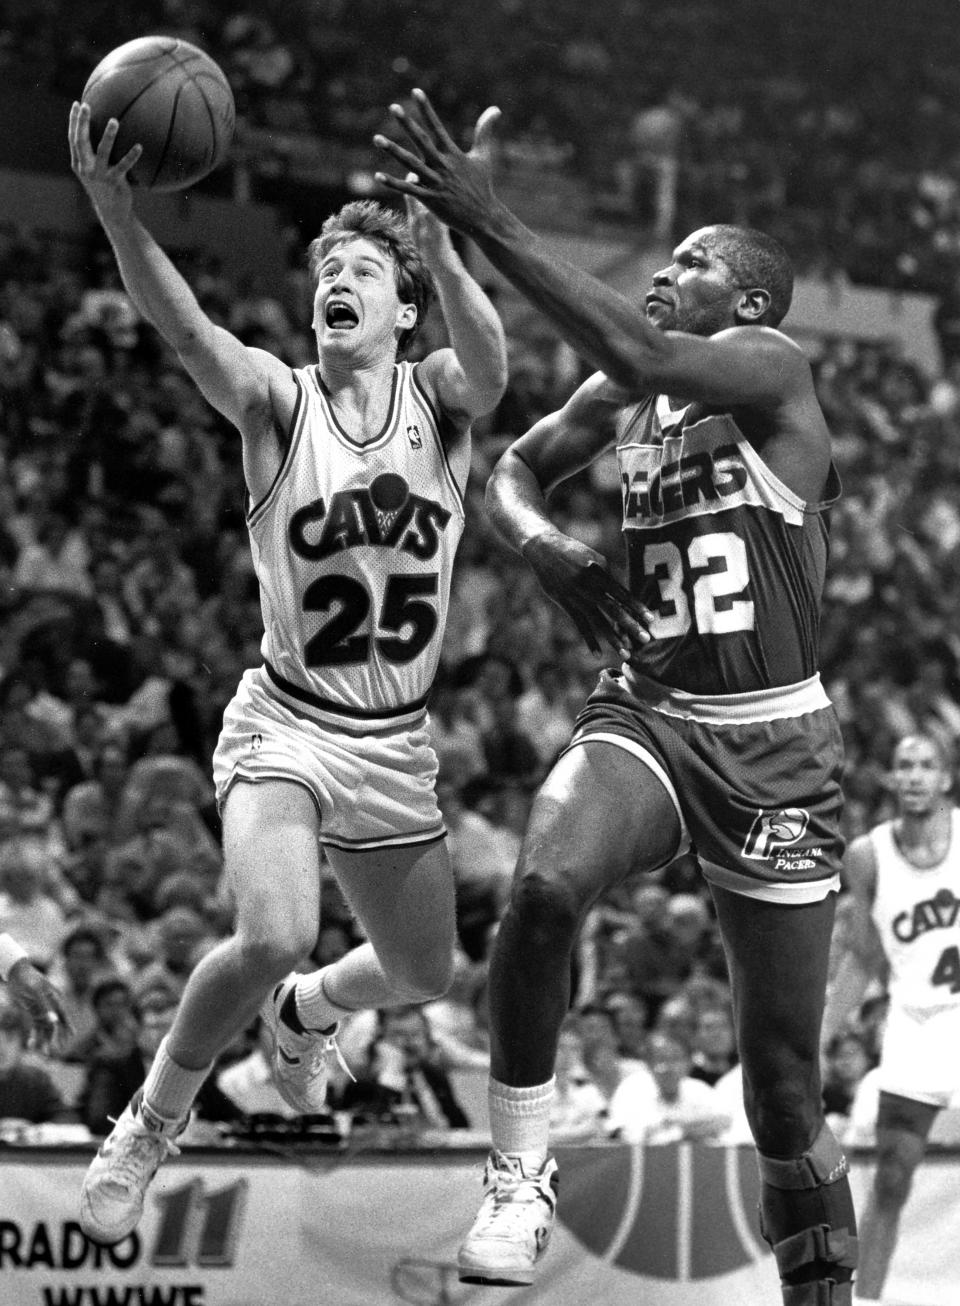 The Cleveland Cavaliers' Mark Price, left, looks for a layup ahead of the Indiana Pacers' Herb Williams at the Richfield Coliseum, April 18, 1988, in Richfield, Ohio.